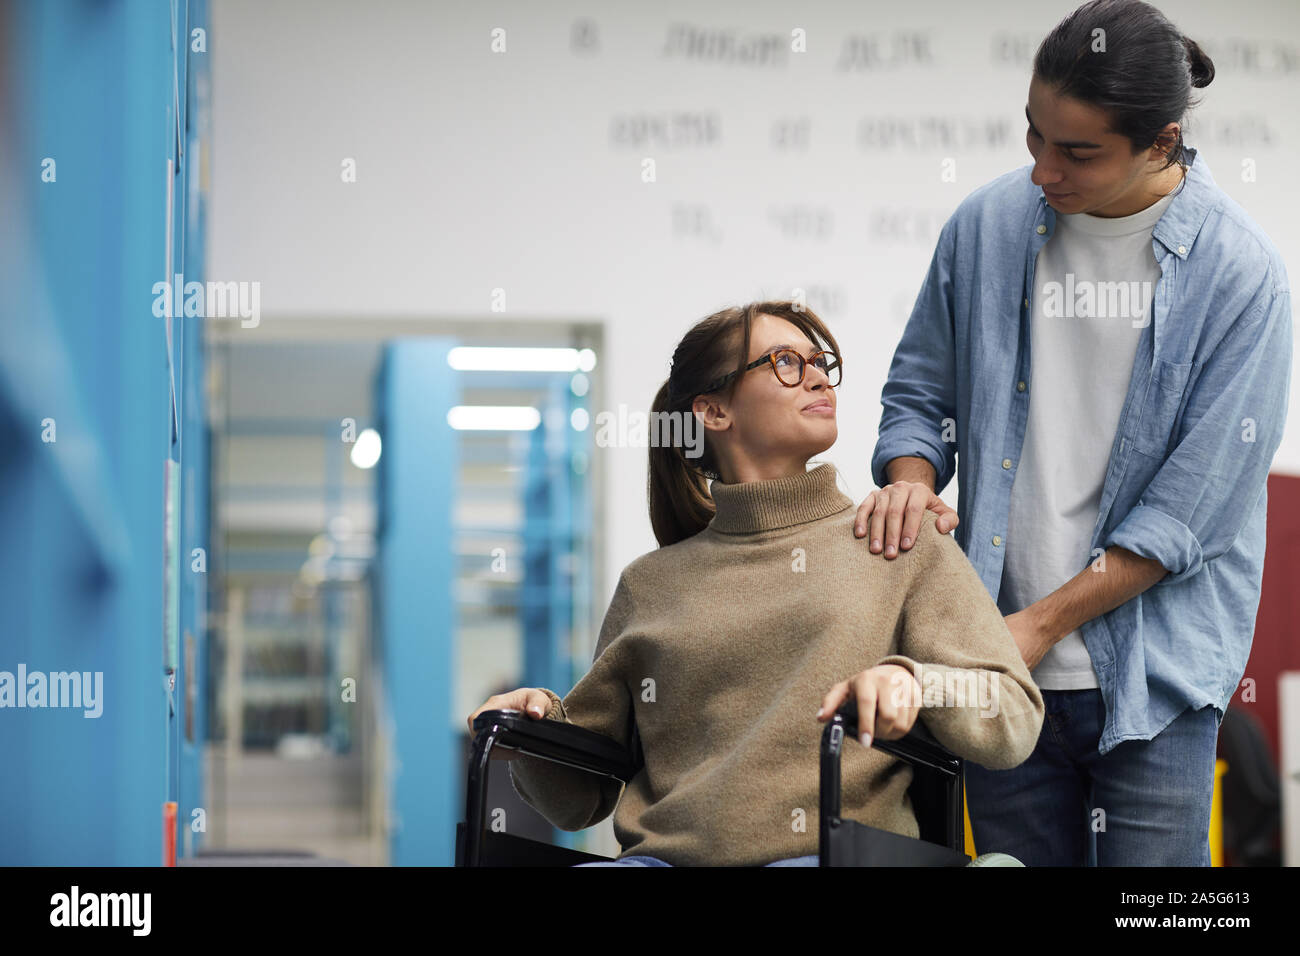 Portrait of young couple, woman in wheelchair, looking at each other and smiling while standing by shelves in library Stock Photo